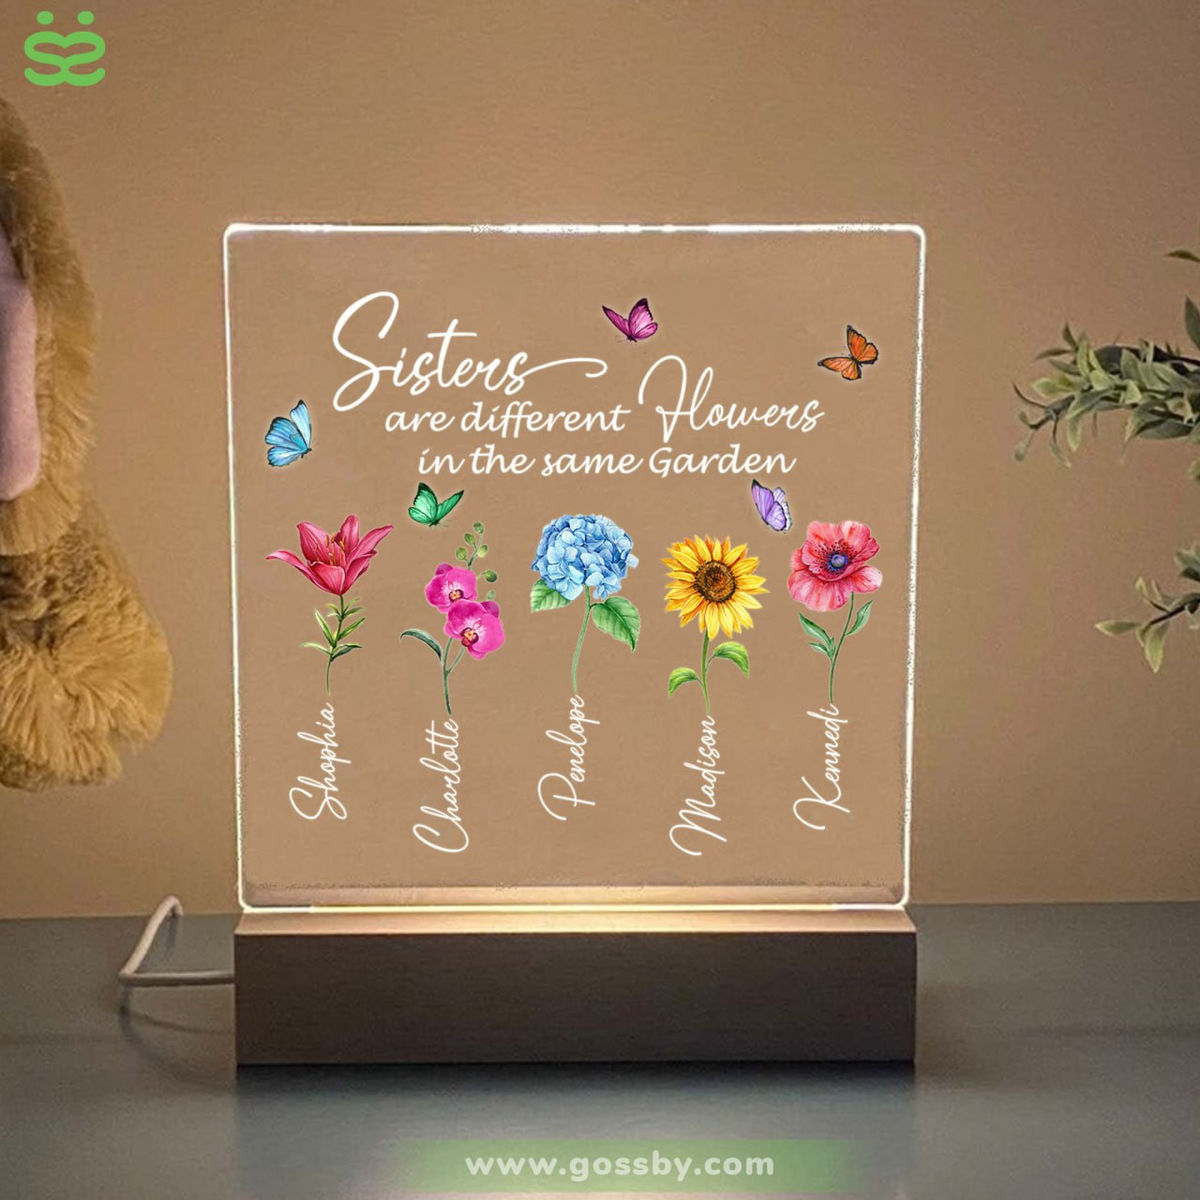 Transparent Lamp - Sisters - Sisters are different flowers in the same garden